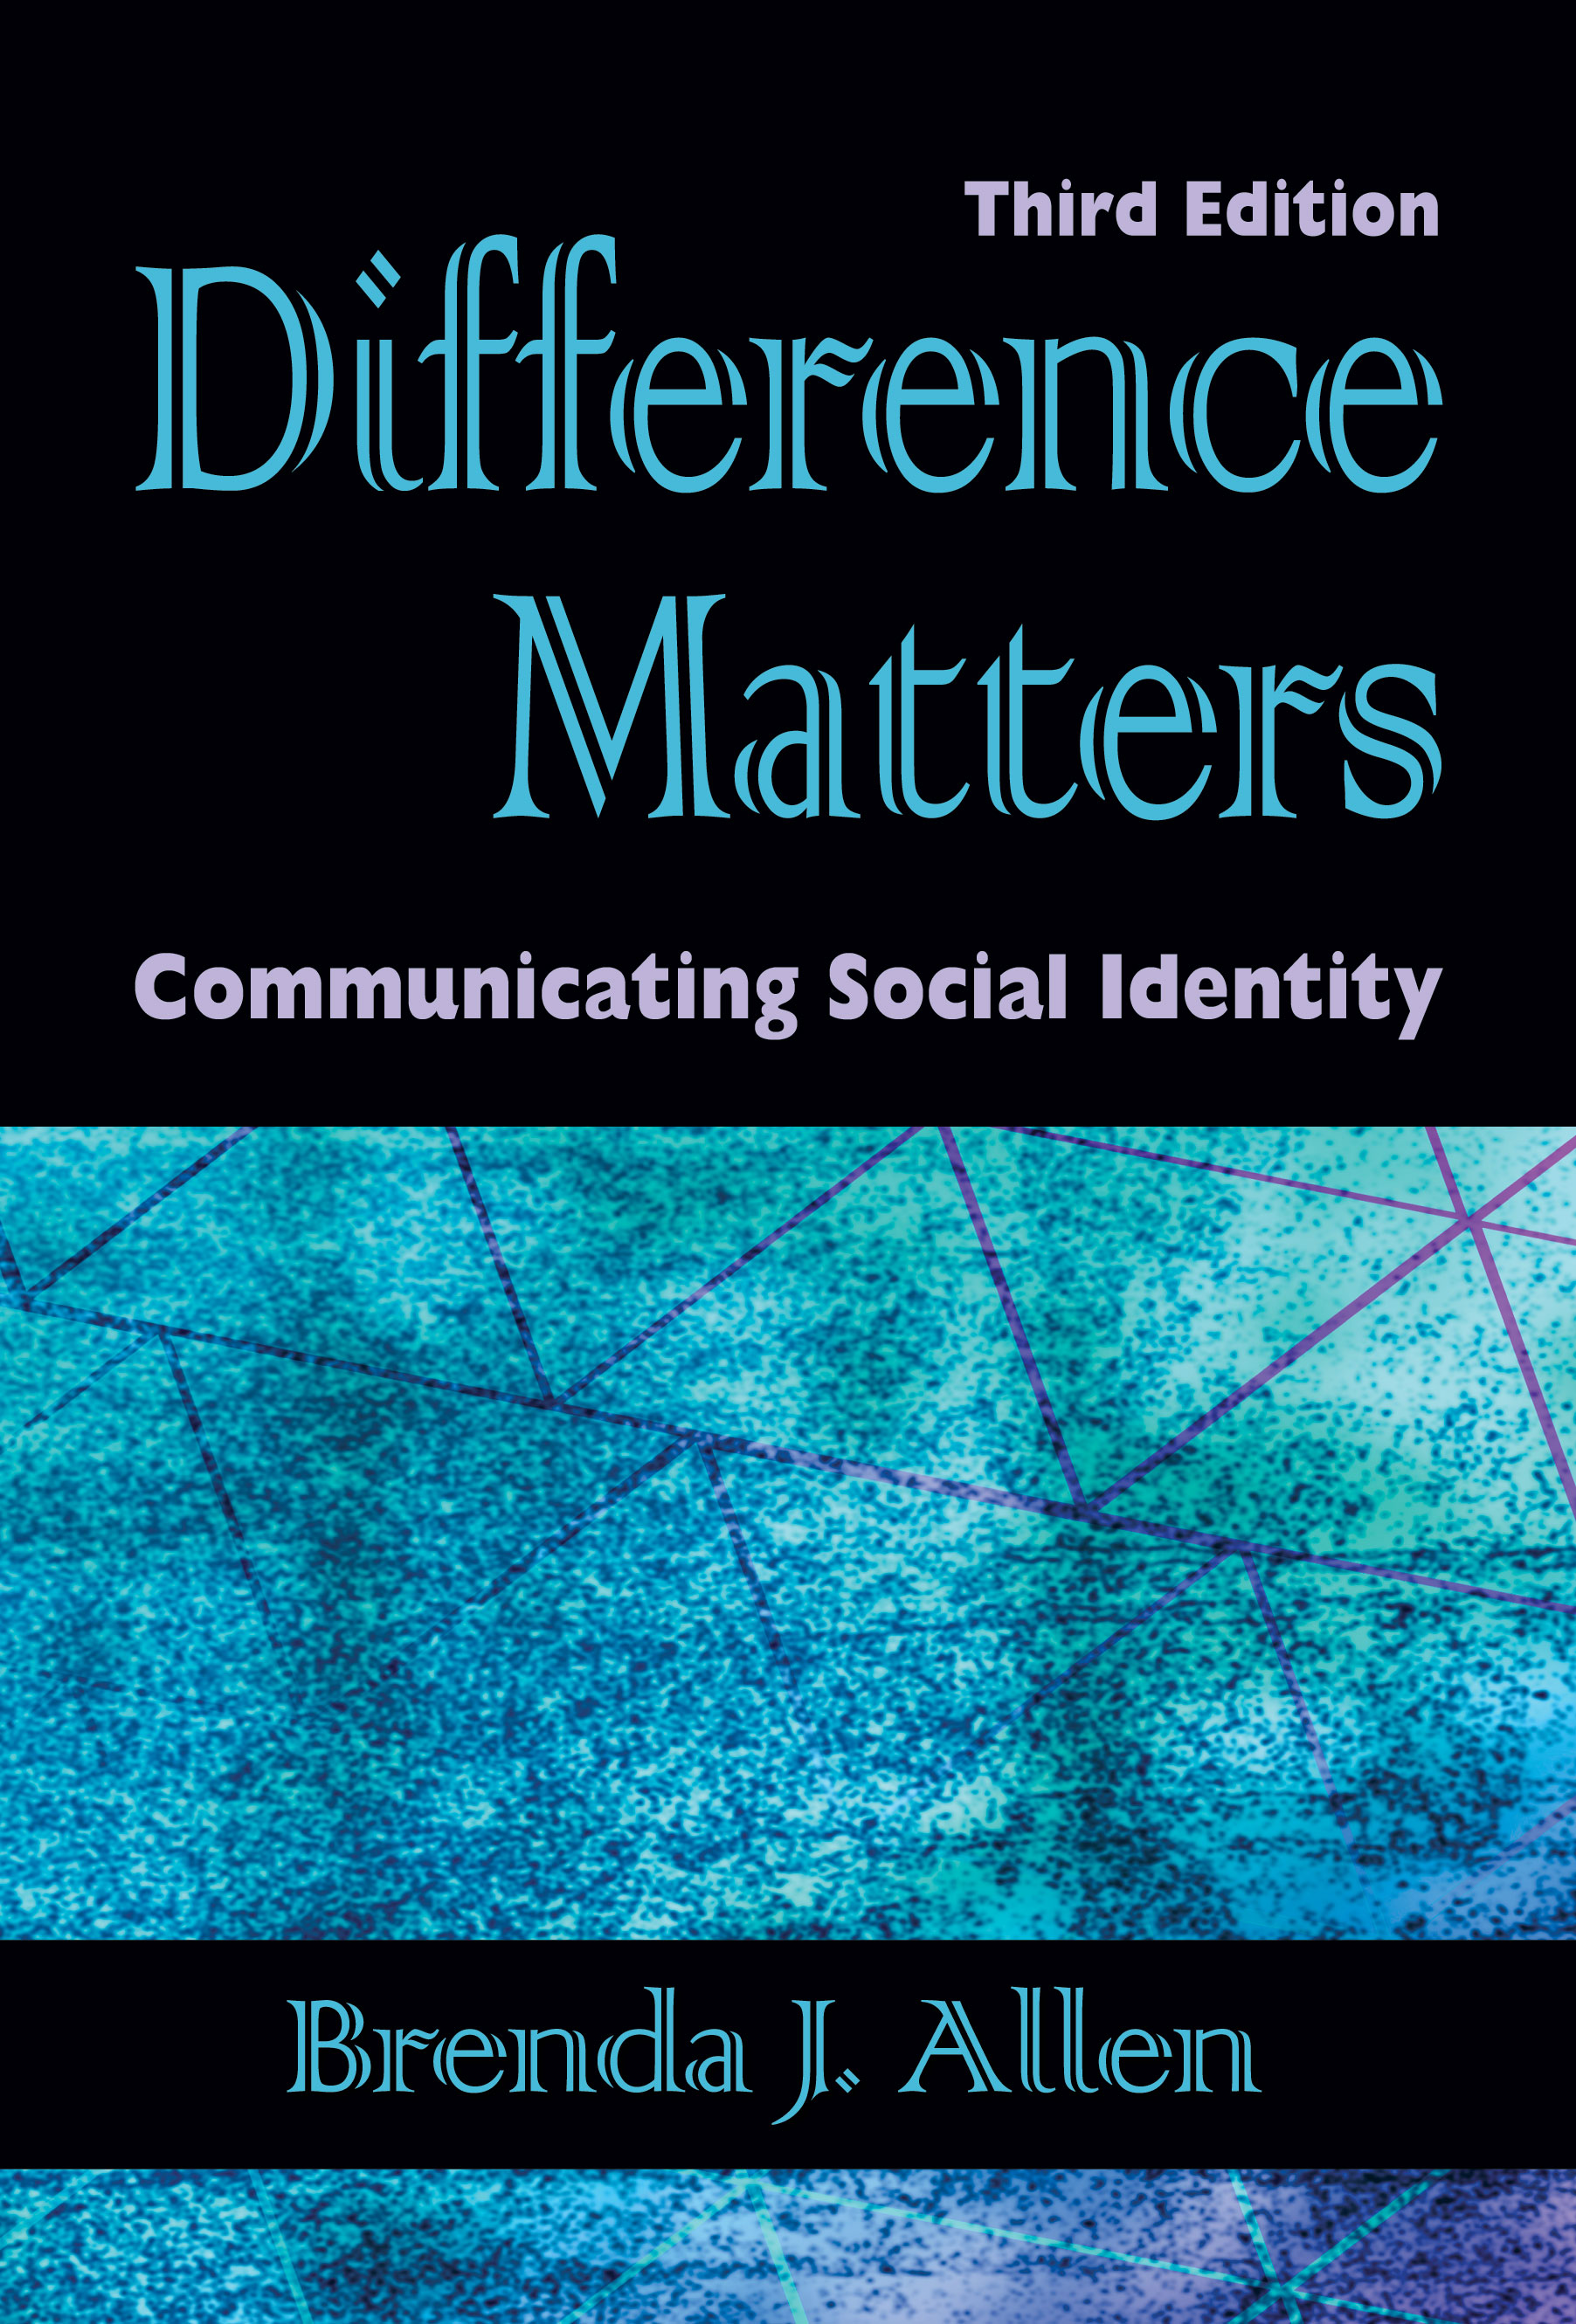 Difference Matters: Communicating Social Identity by Brenda J. Allen